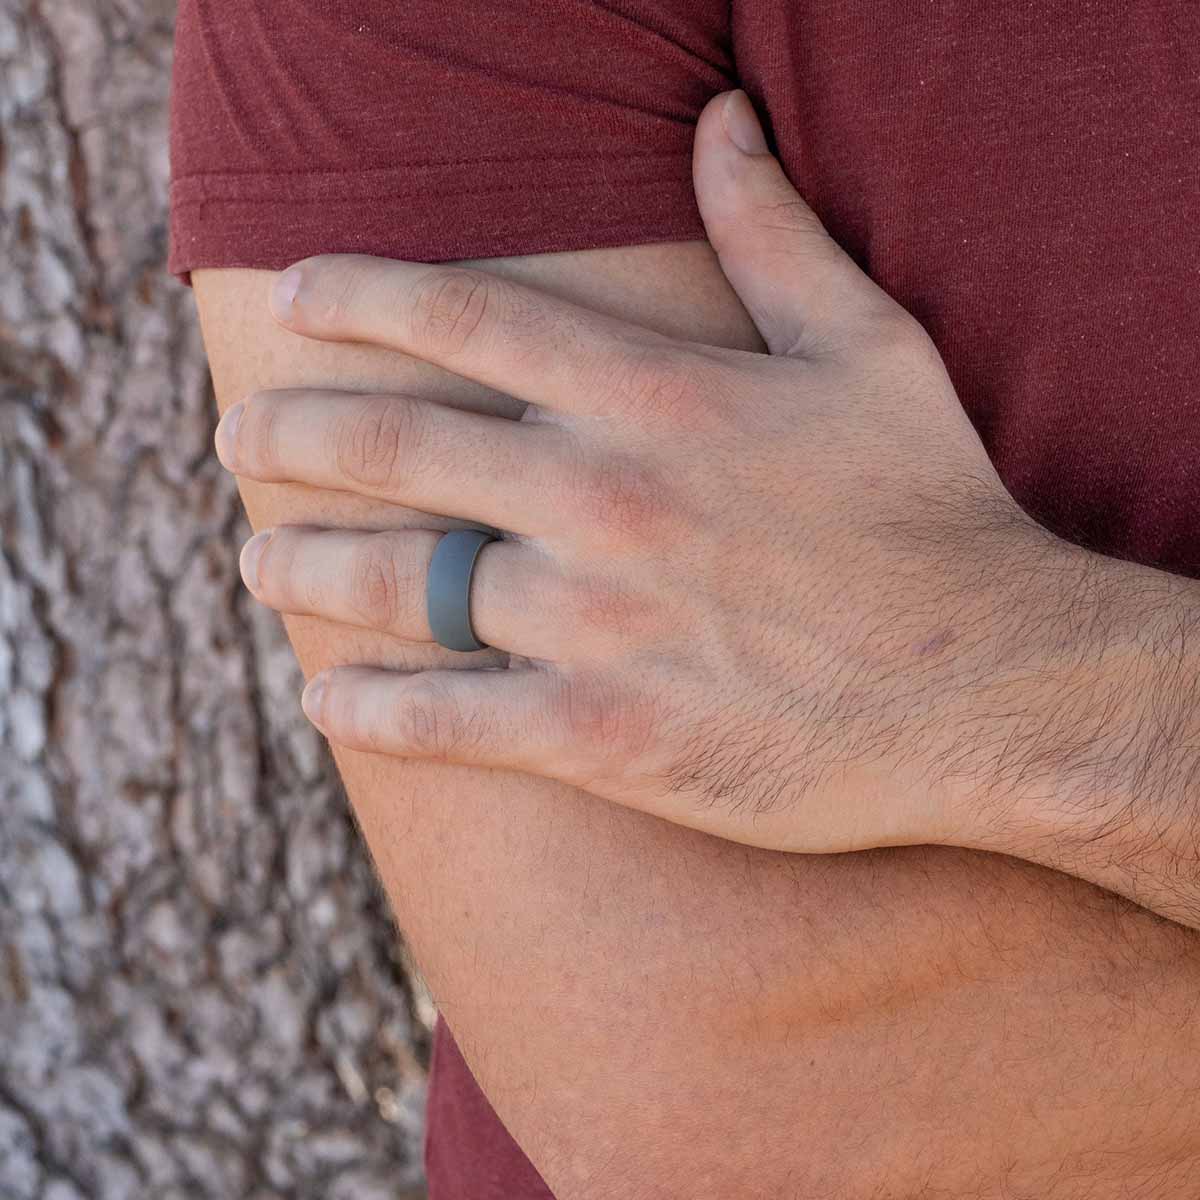 Male Hand wearing a gray rubber wedding ring